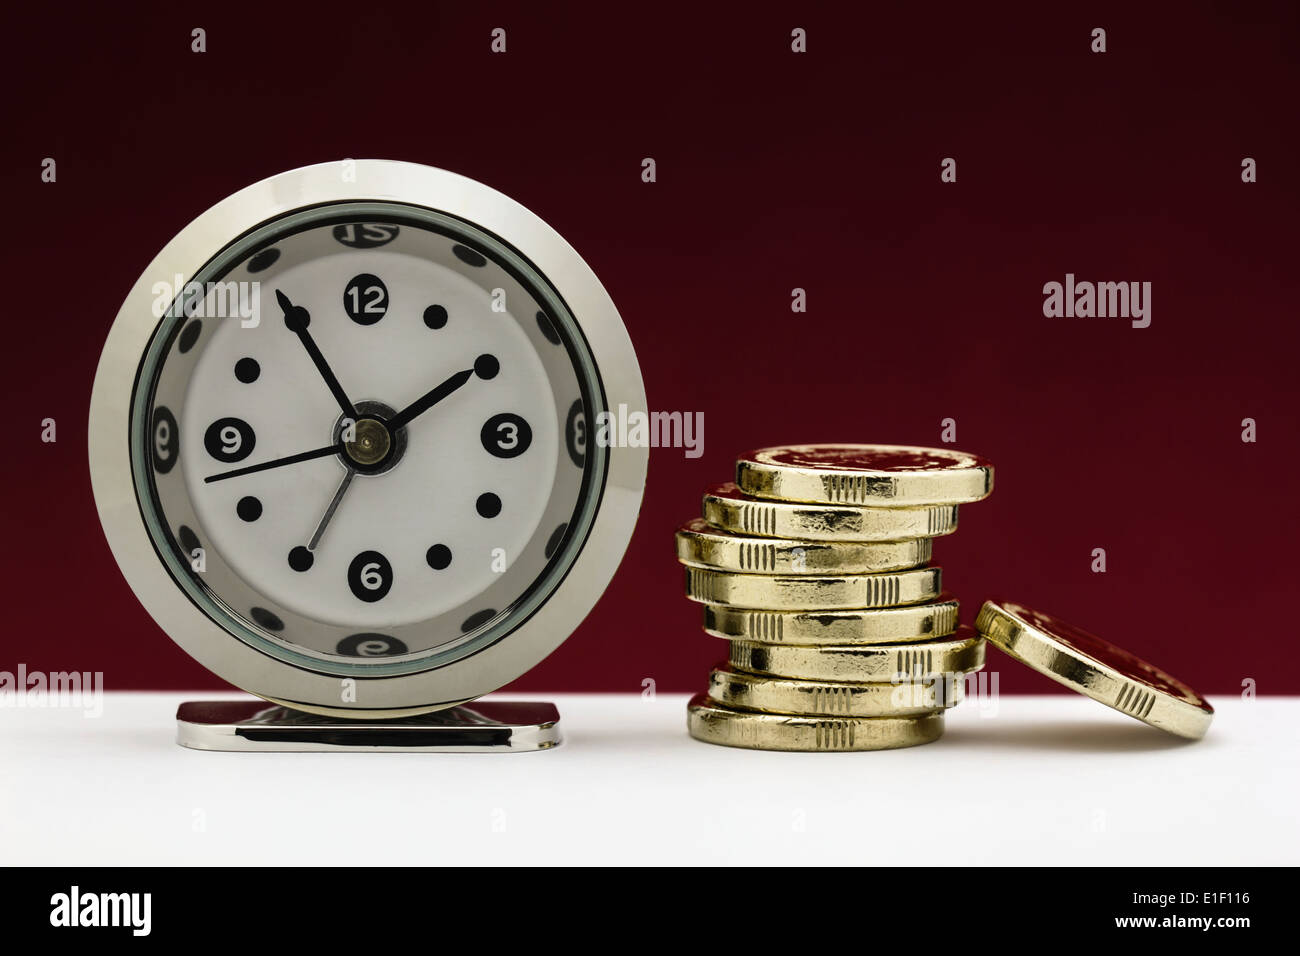 Clock with a stack of gold coins illustrating the concepts of time is money or financial deadline/pressure. Stock Photo